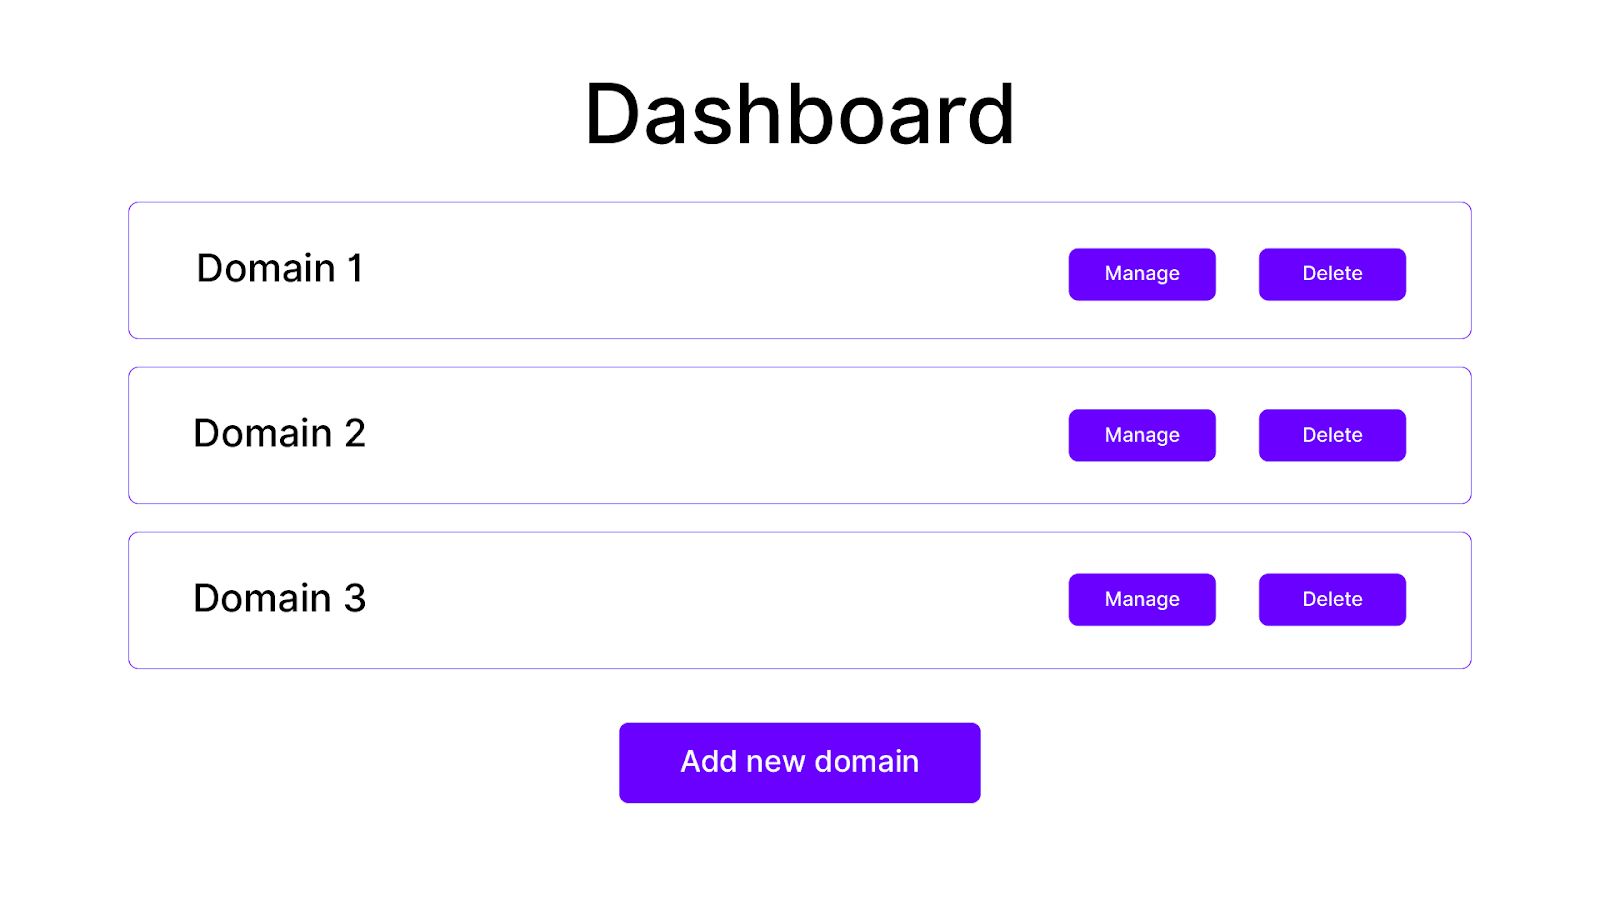 A dashboard for managing multiple domains.